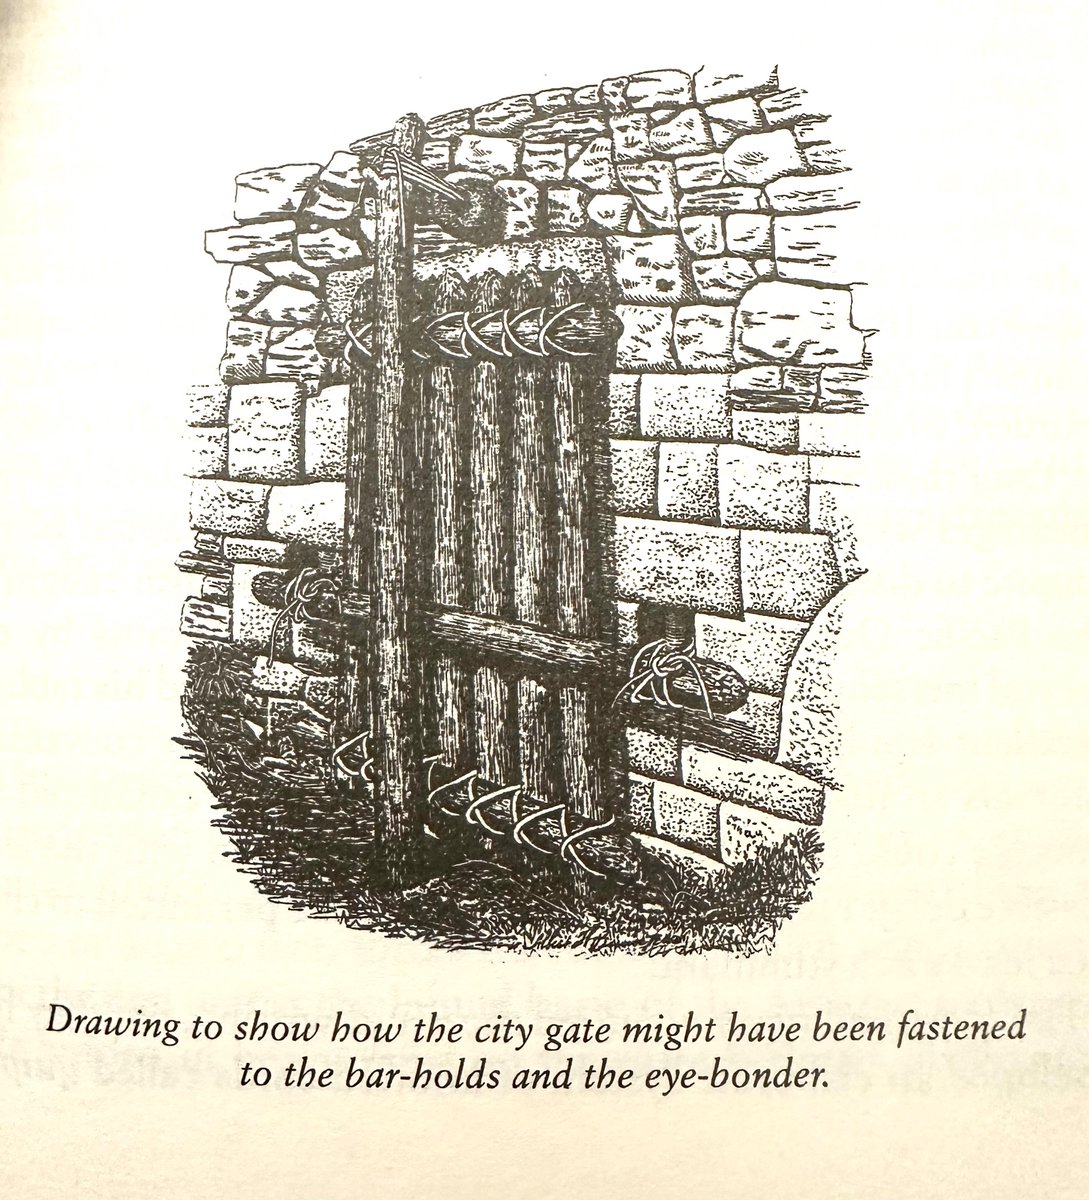 If you’d been wondering what these stone rings are for, as found on doors at Machu Picchu, here’s an old sketch via Hiram Bingham (the scientific “discoverer” of Machu Picchu) of an Inca style gate.